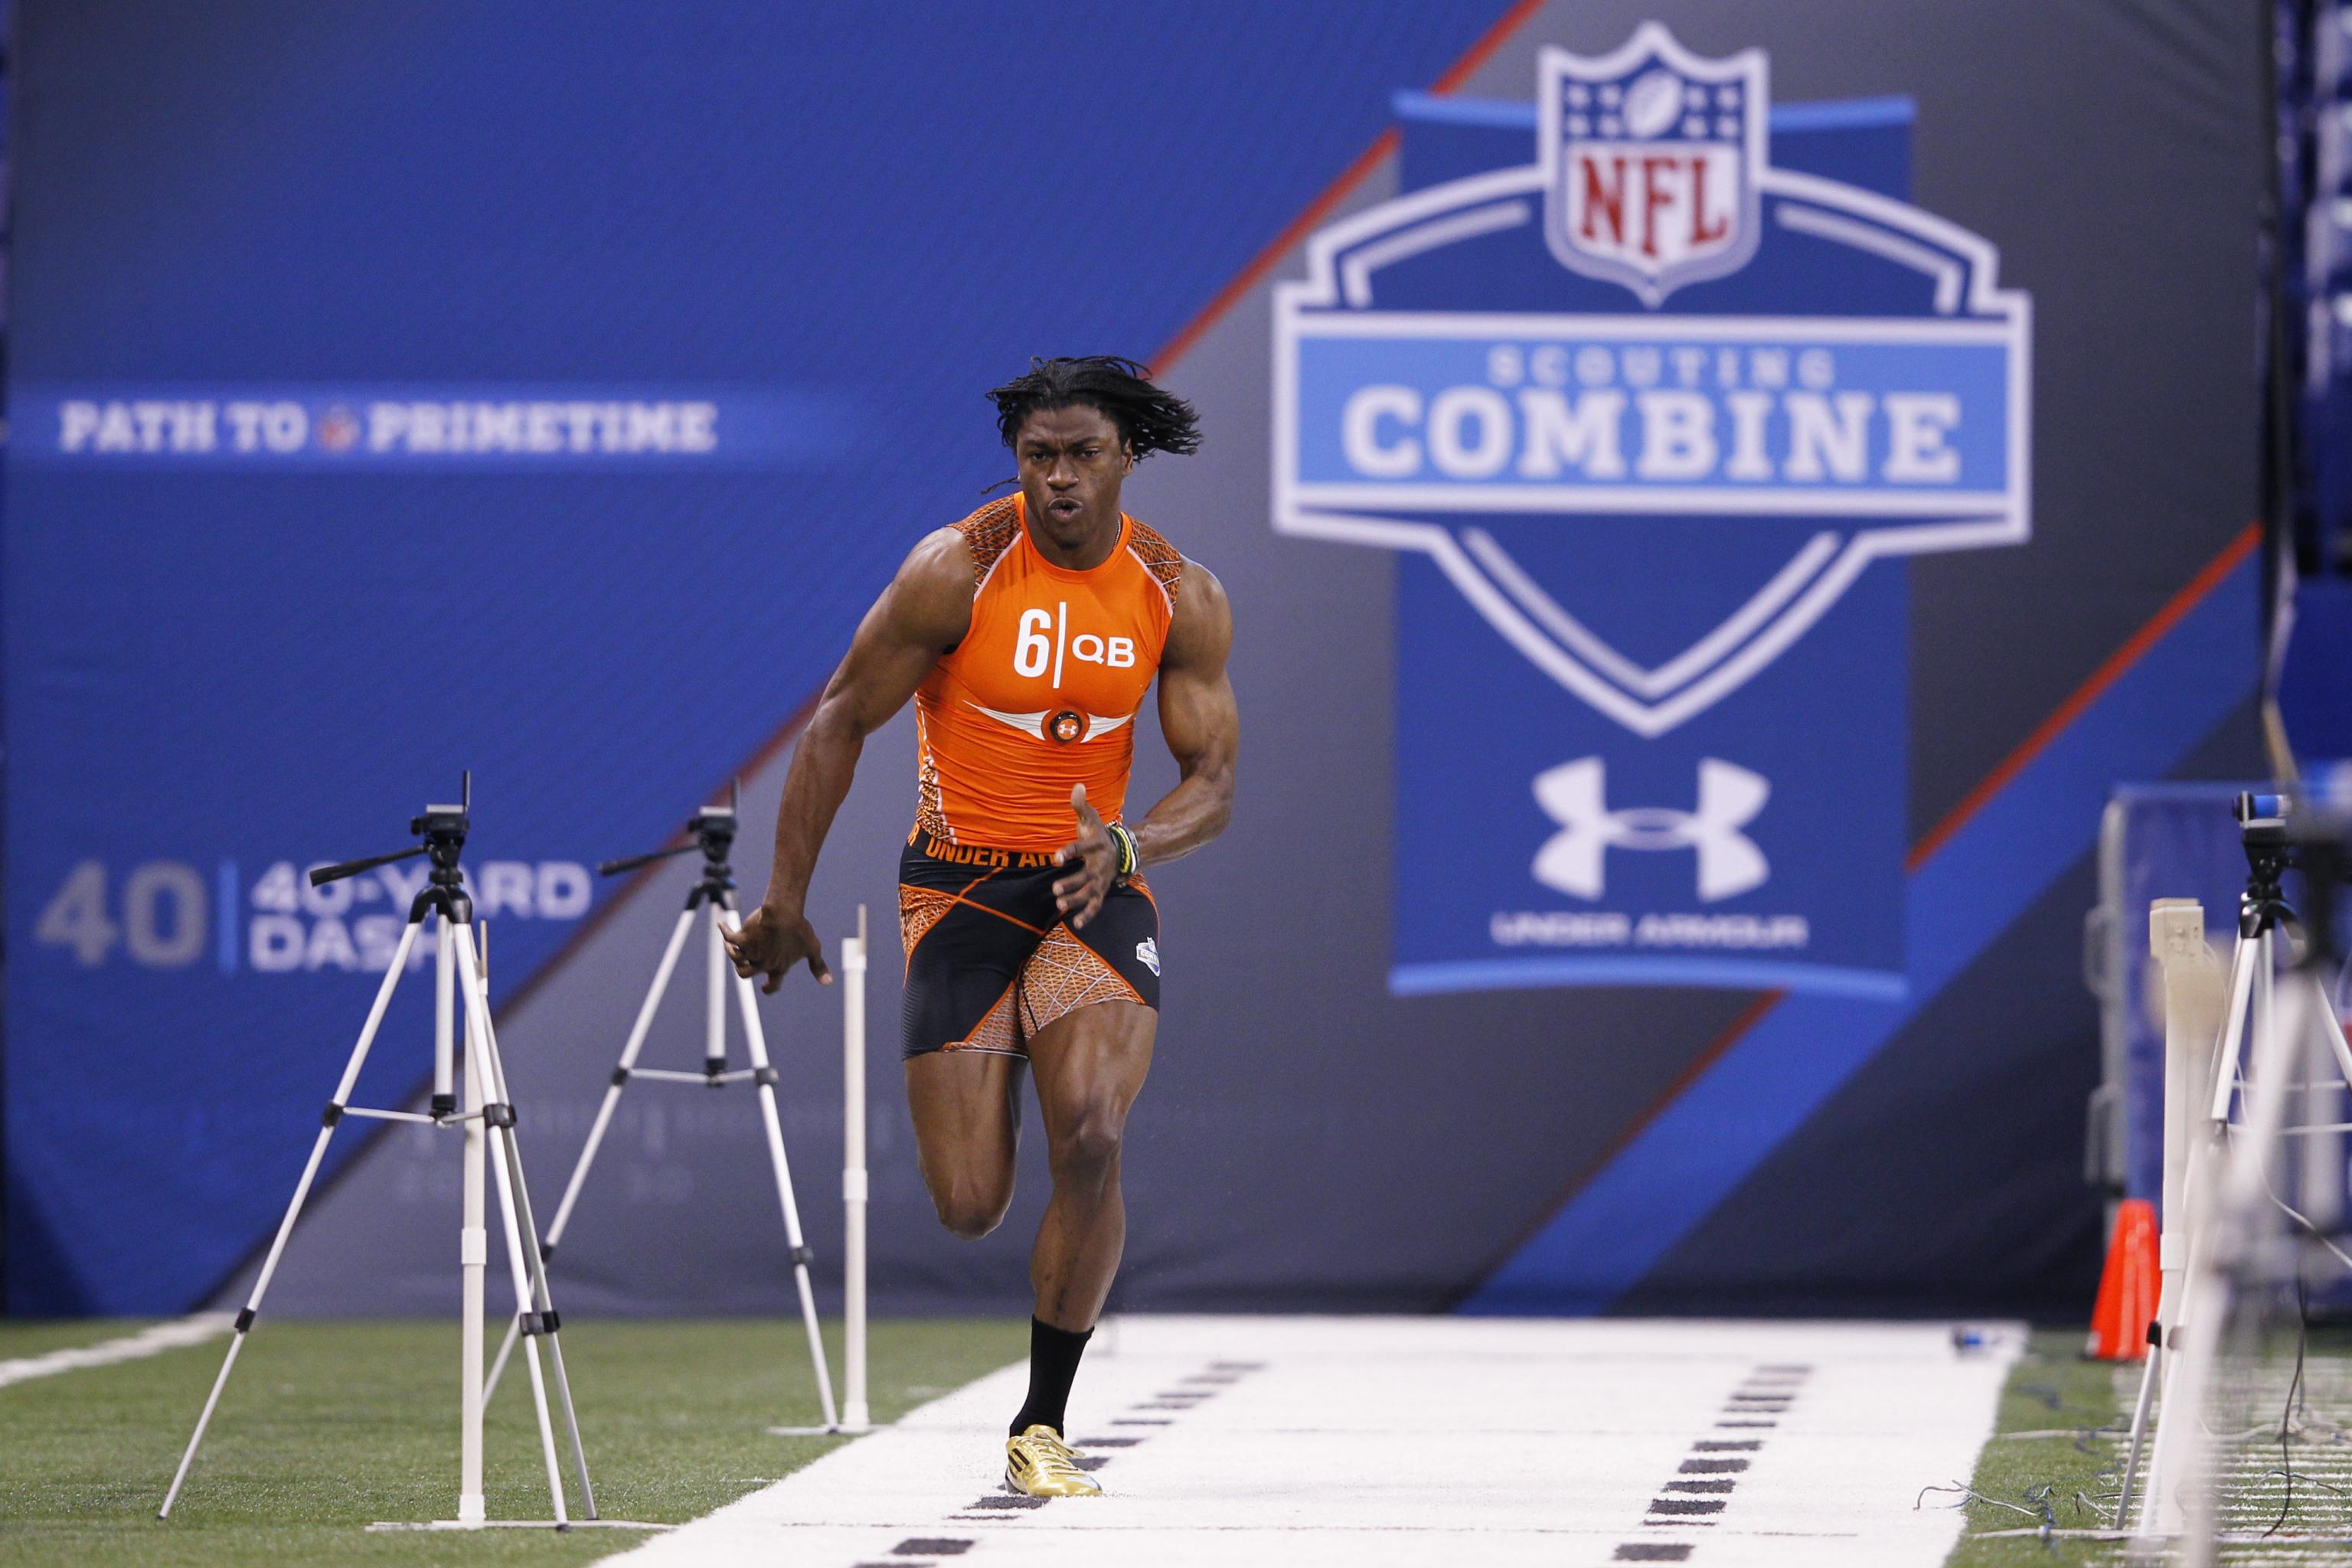 Want to attend the 2016 NFL Scouting Combine?